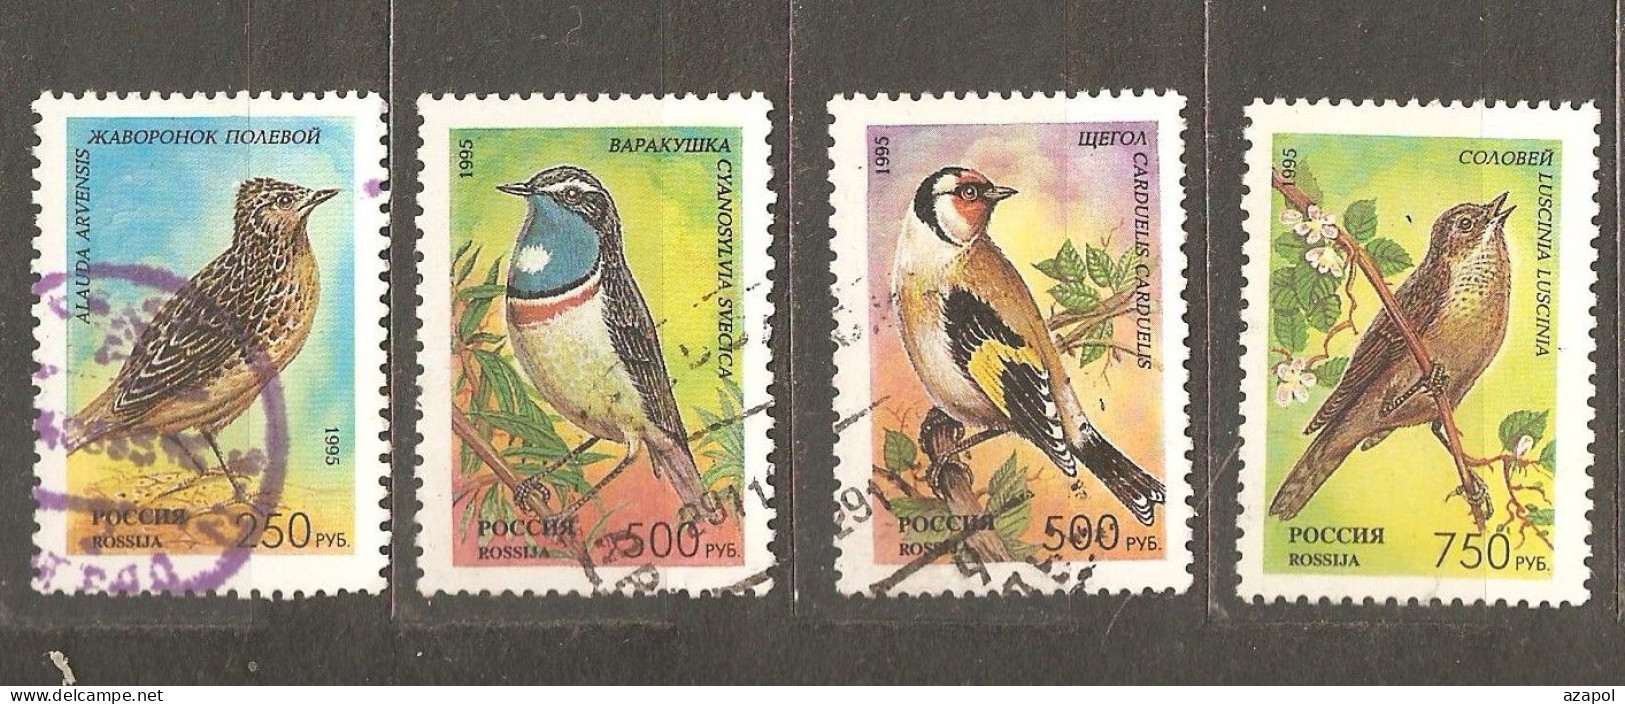 Russia: 4 Used Stamps Of A Set, Songbirds, 1995, Mi#440-4 - Gebraucht